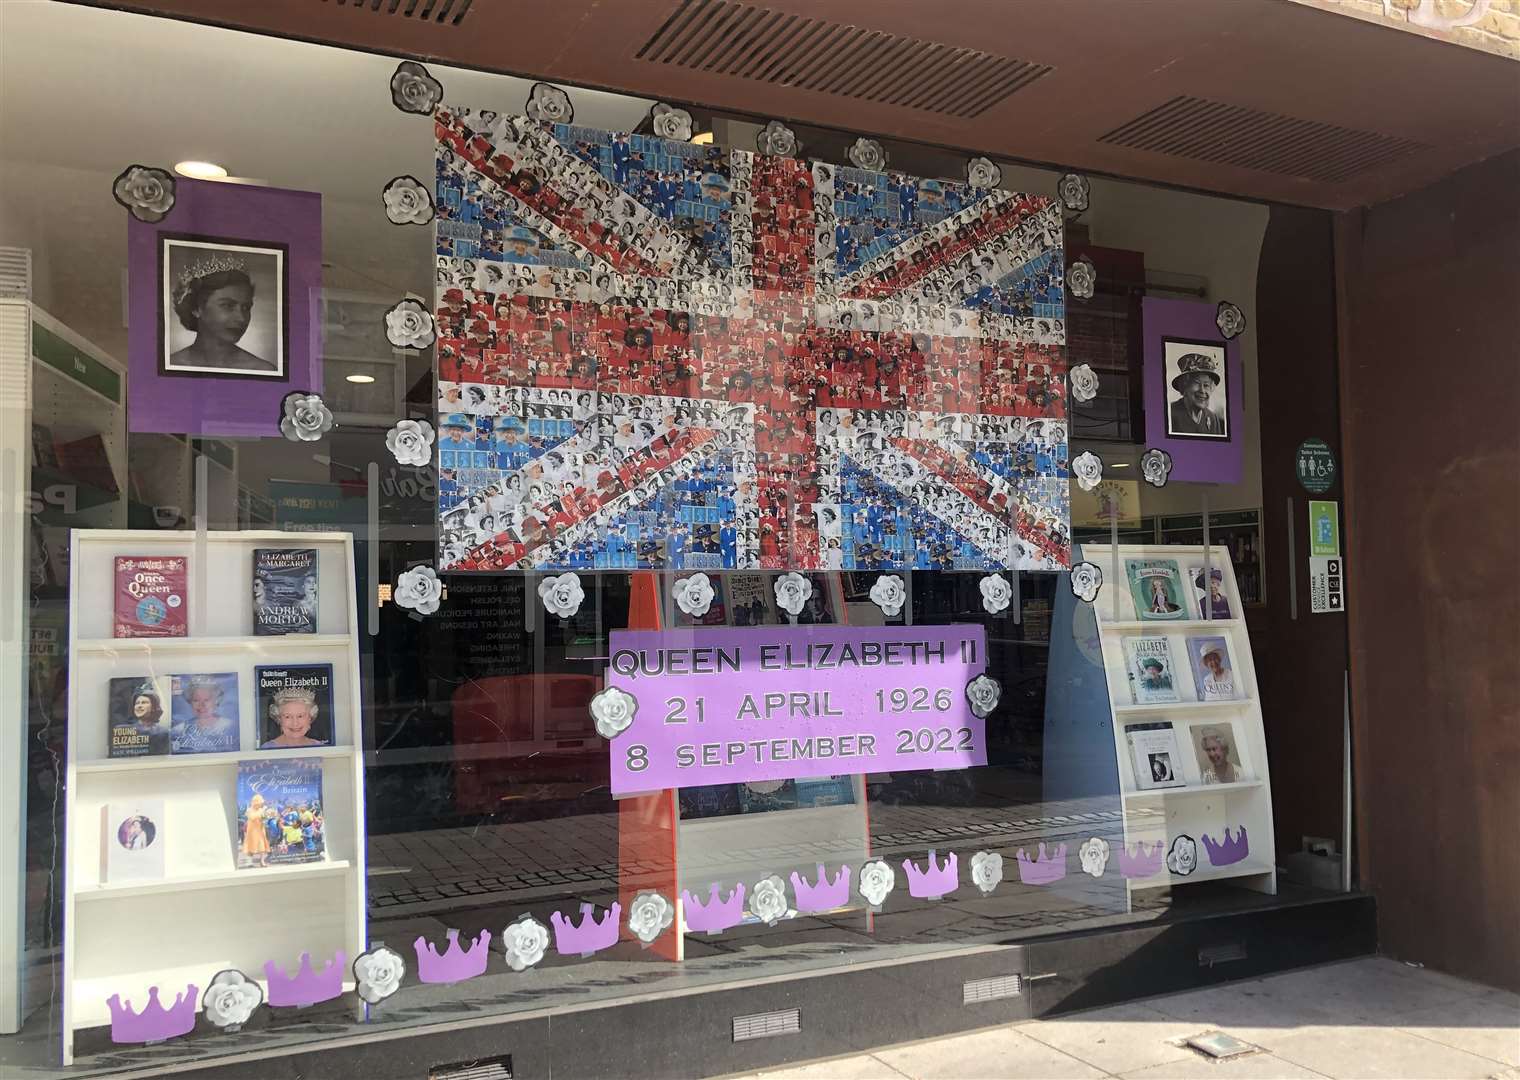 Businesses in Gravesend Town Centre have put up their own tributes to the Queen in shop windows